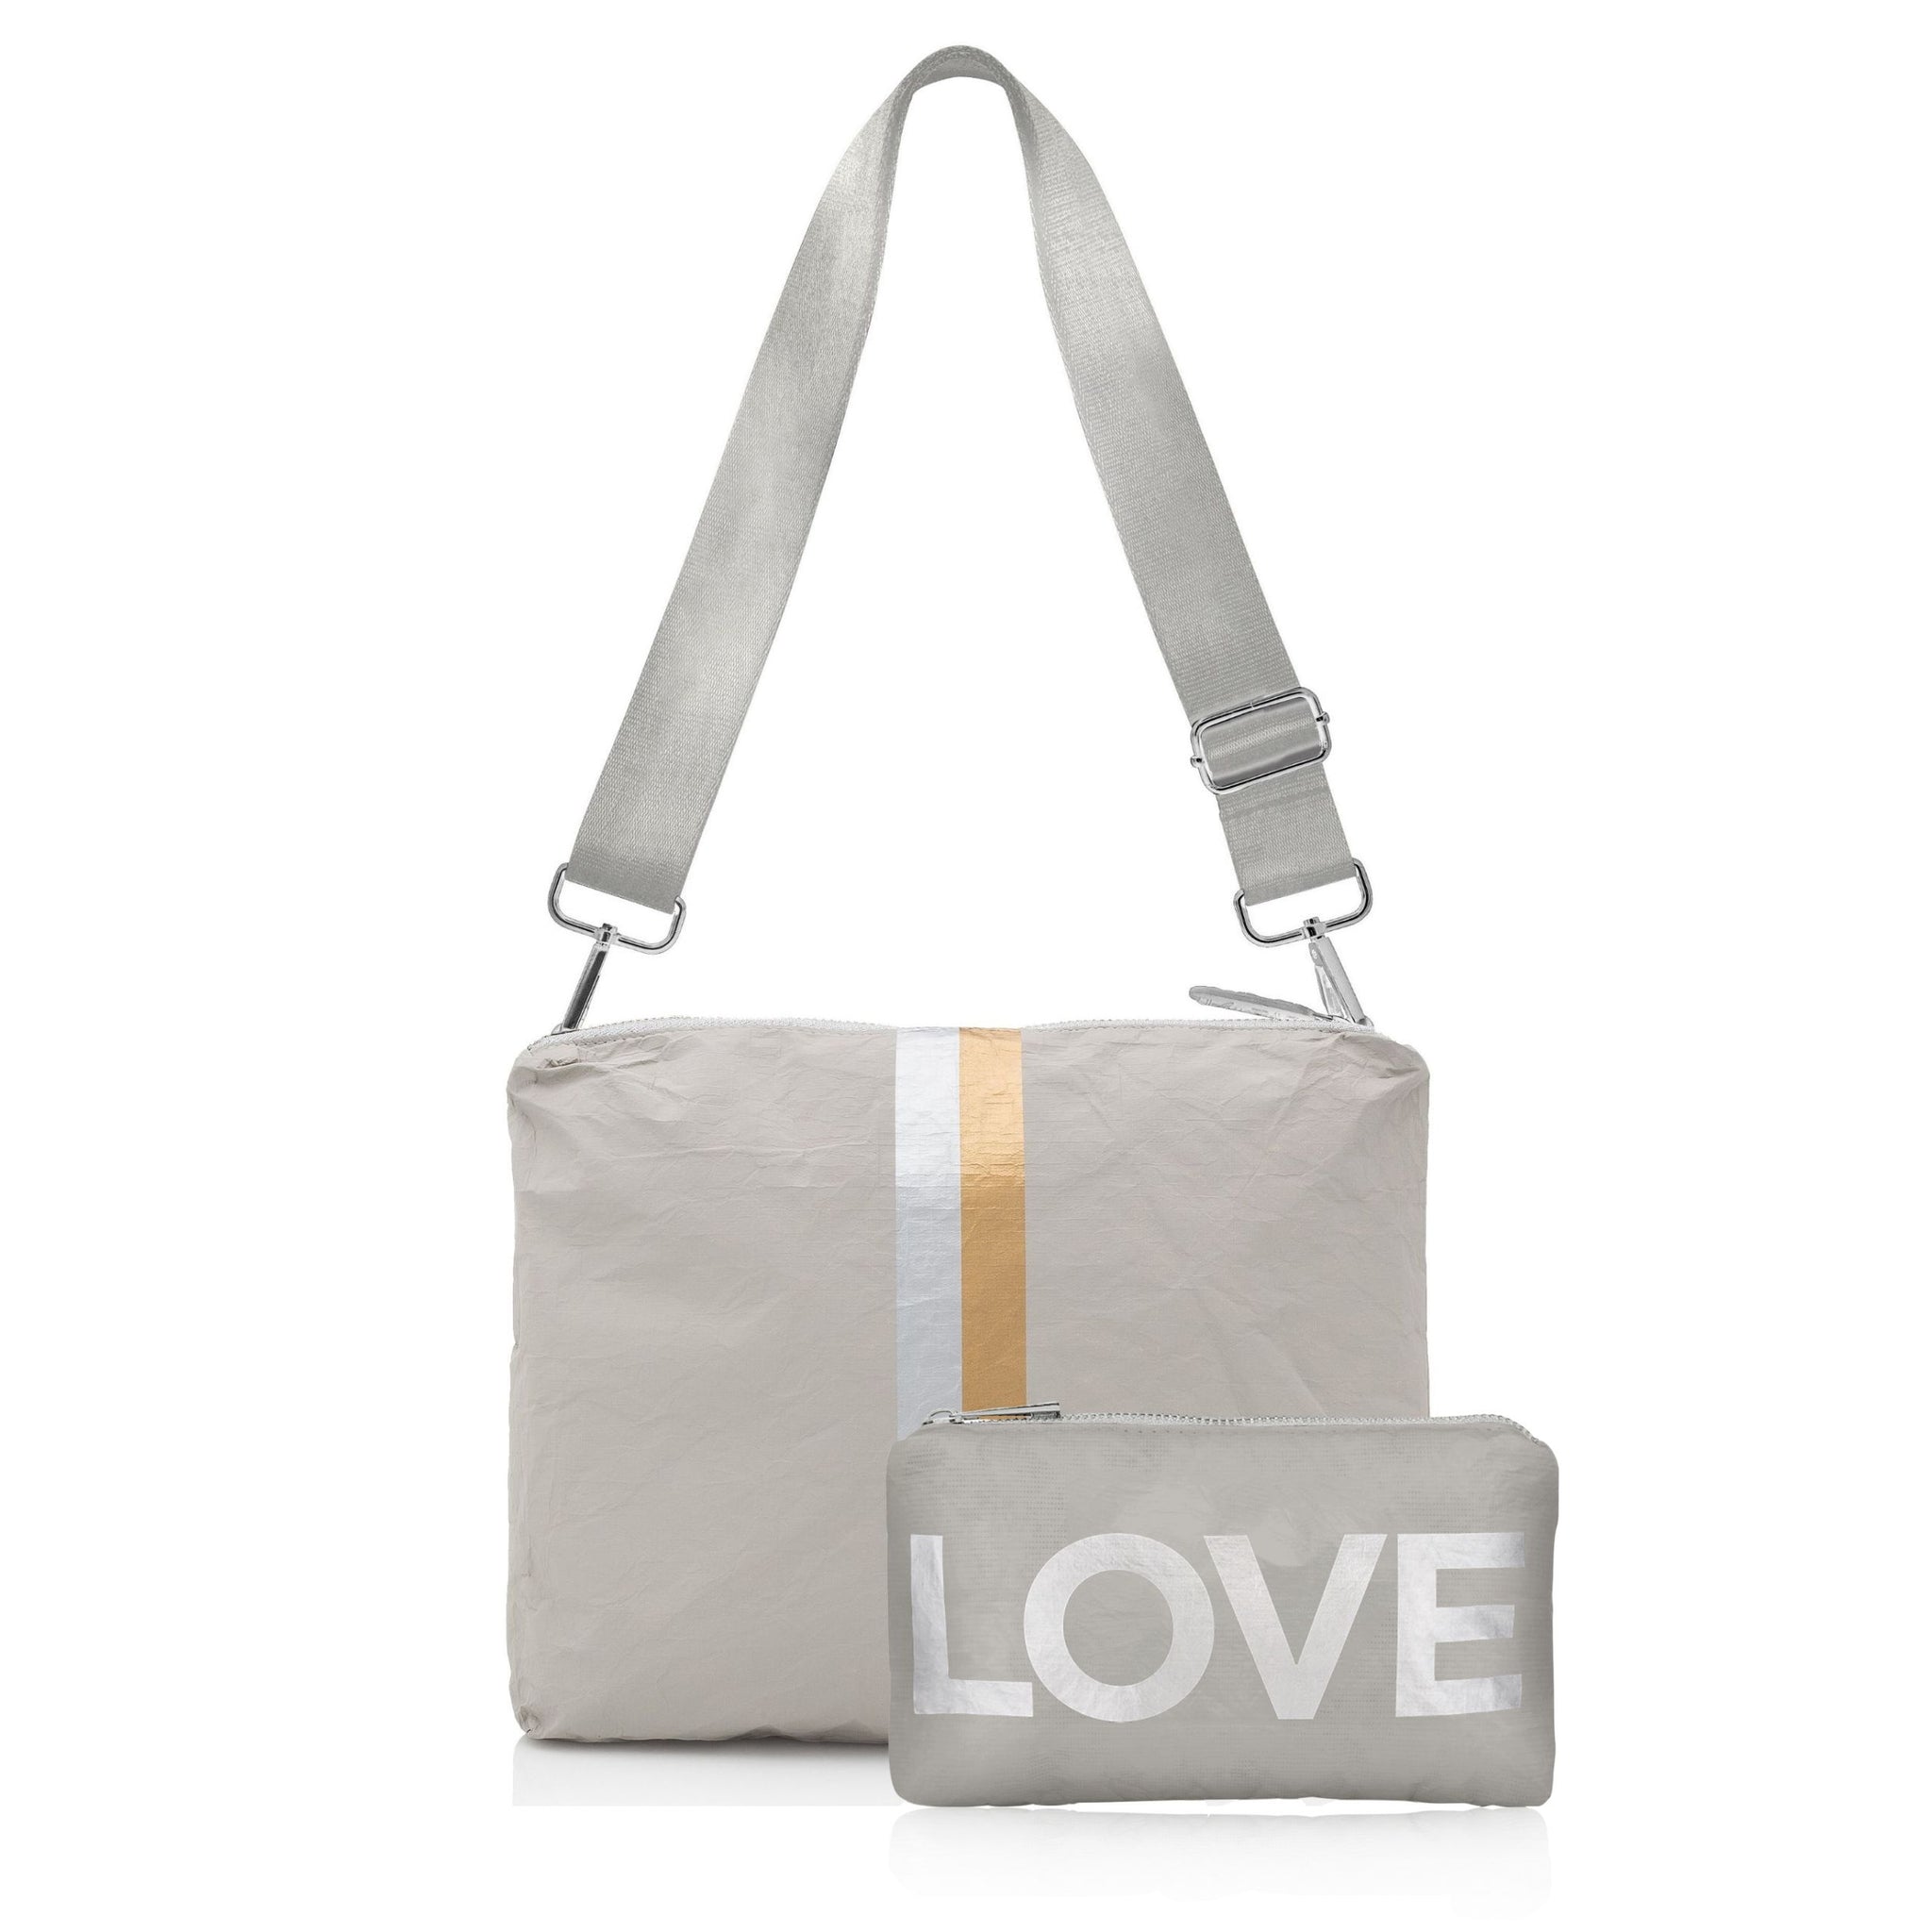 Everyday Purse Essentials Two Pack - Earth Gray with Stripes & LOVE